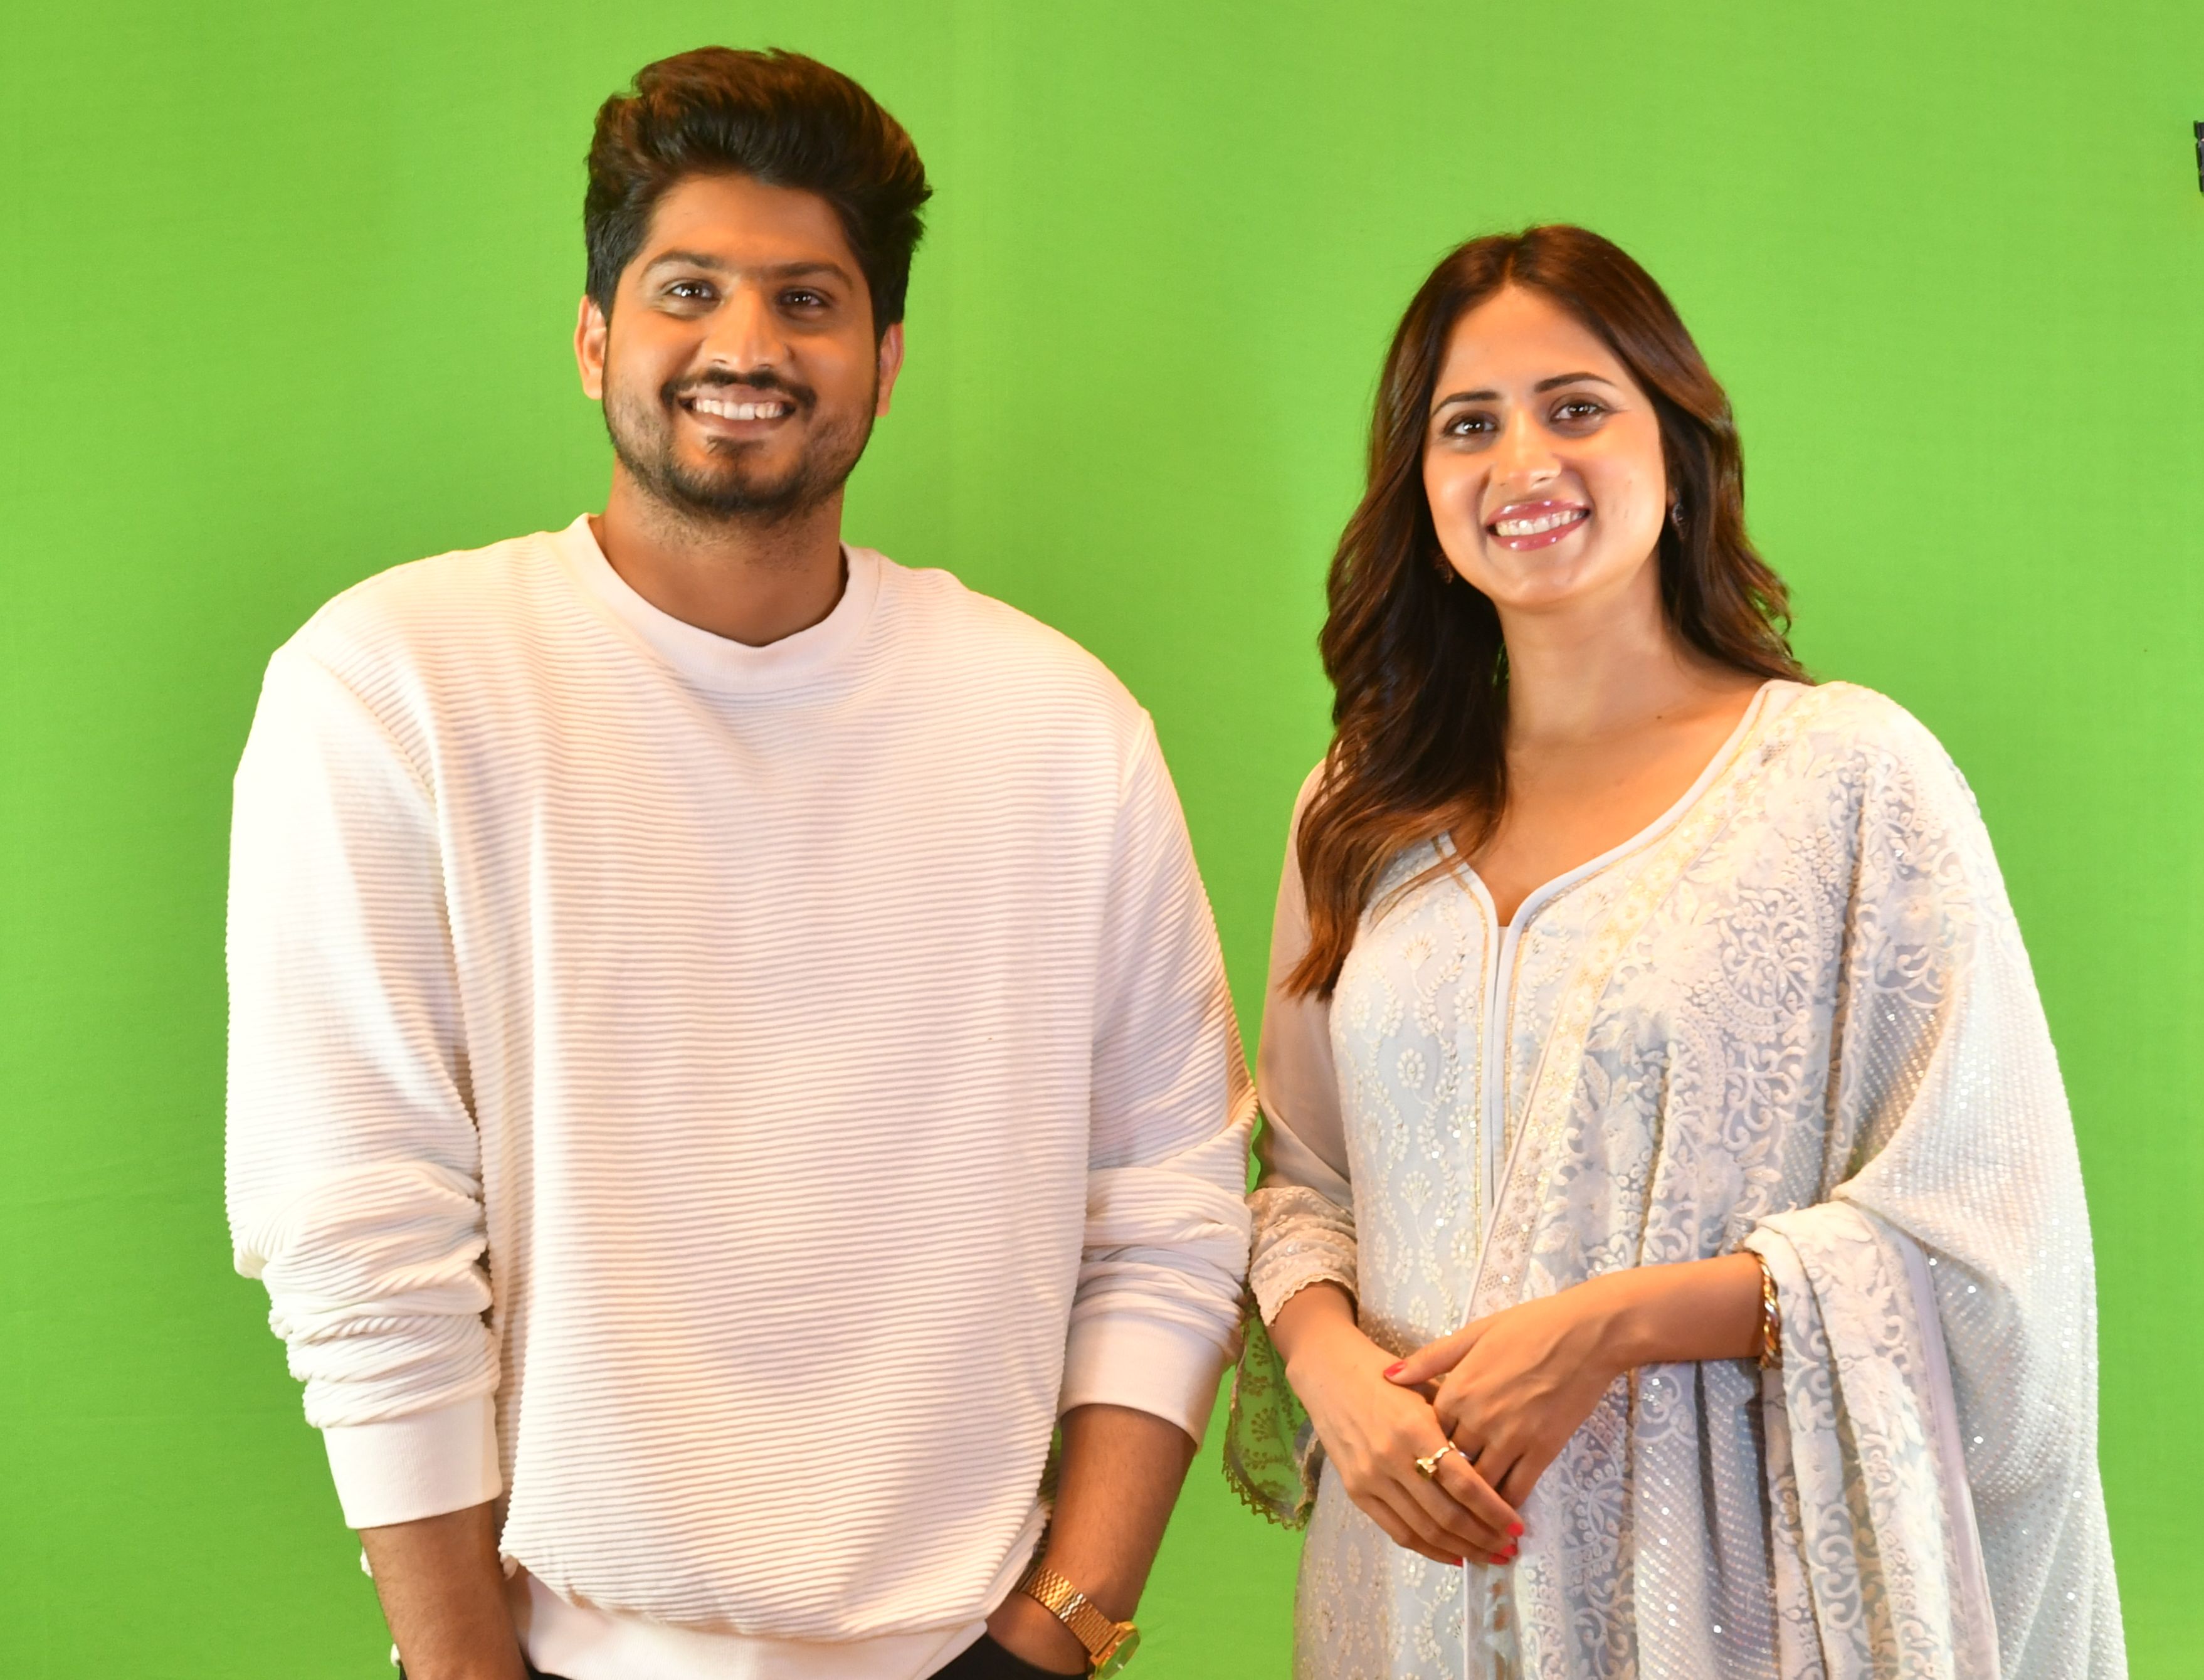 Young stars Sargun Mehta and Gurnam Bhullar, who will soon be seen in the Punjabi film Sohreyan Da Pind Aa Gaya, believe that with fame comes responsibility as well as challenges